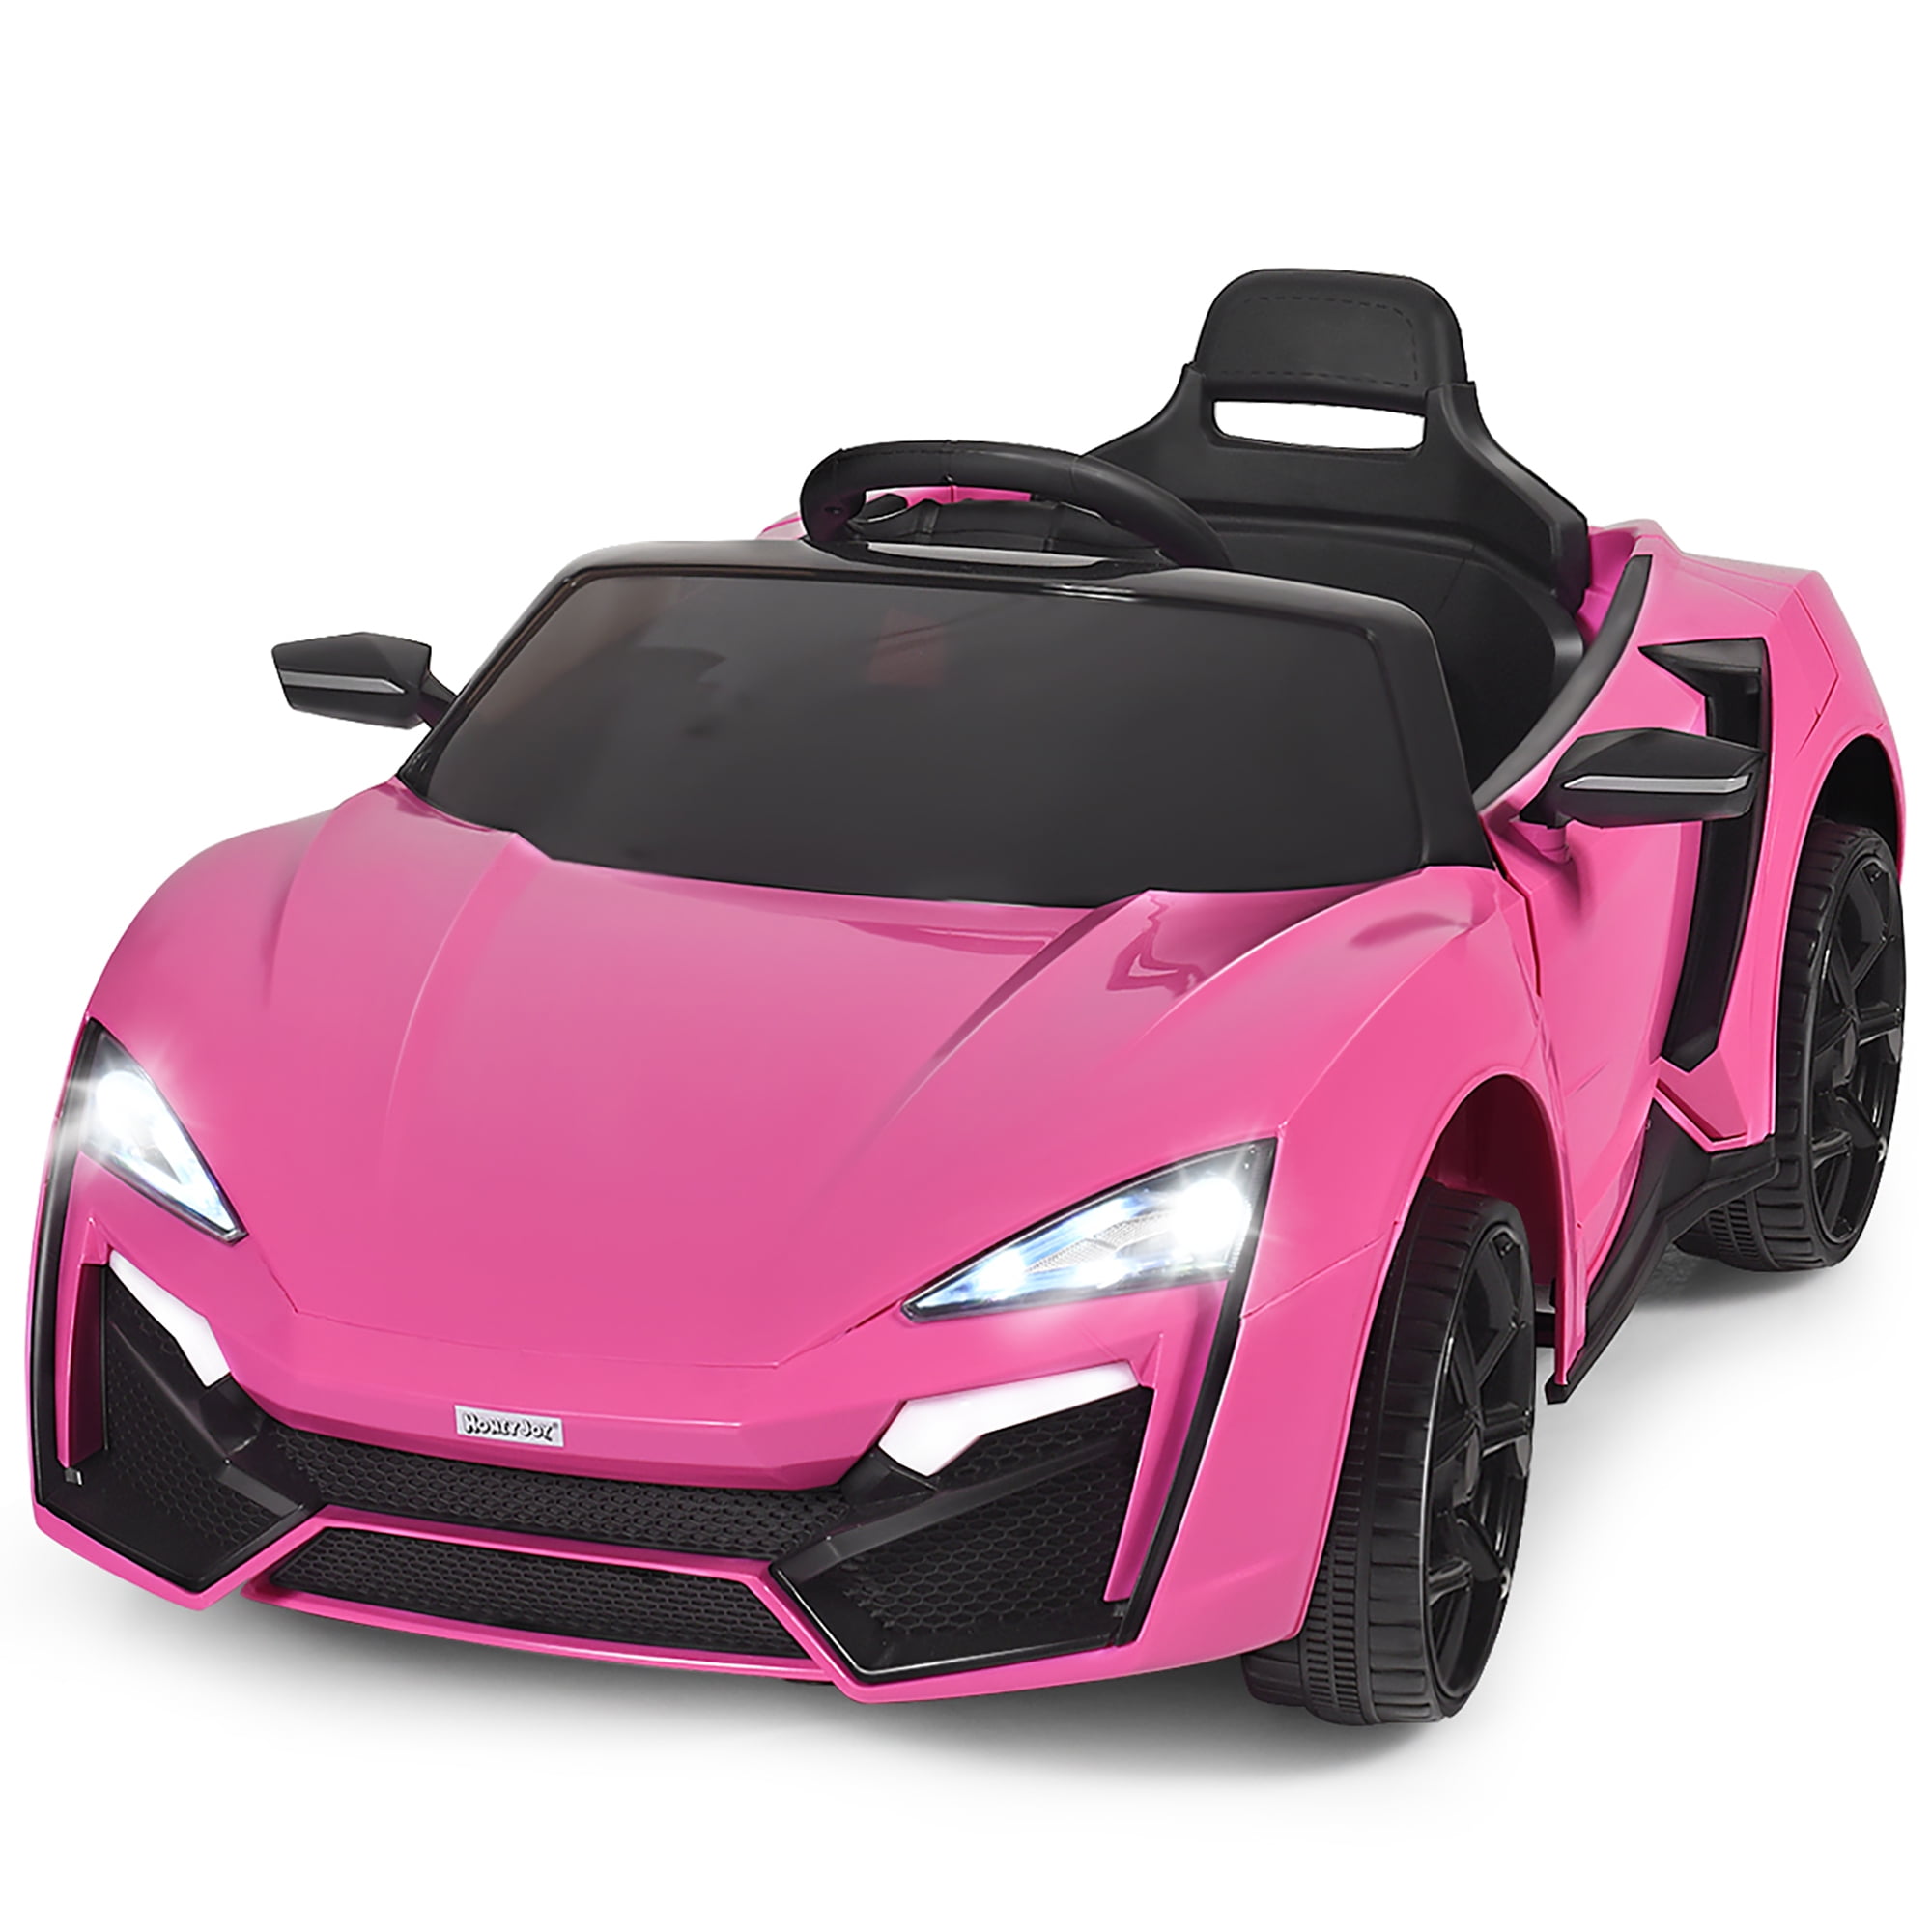 LED Lights & Remote Control Pink Details about   12V Electric Ride on Car for Kids w/ MP3 AUX 